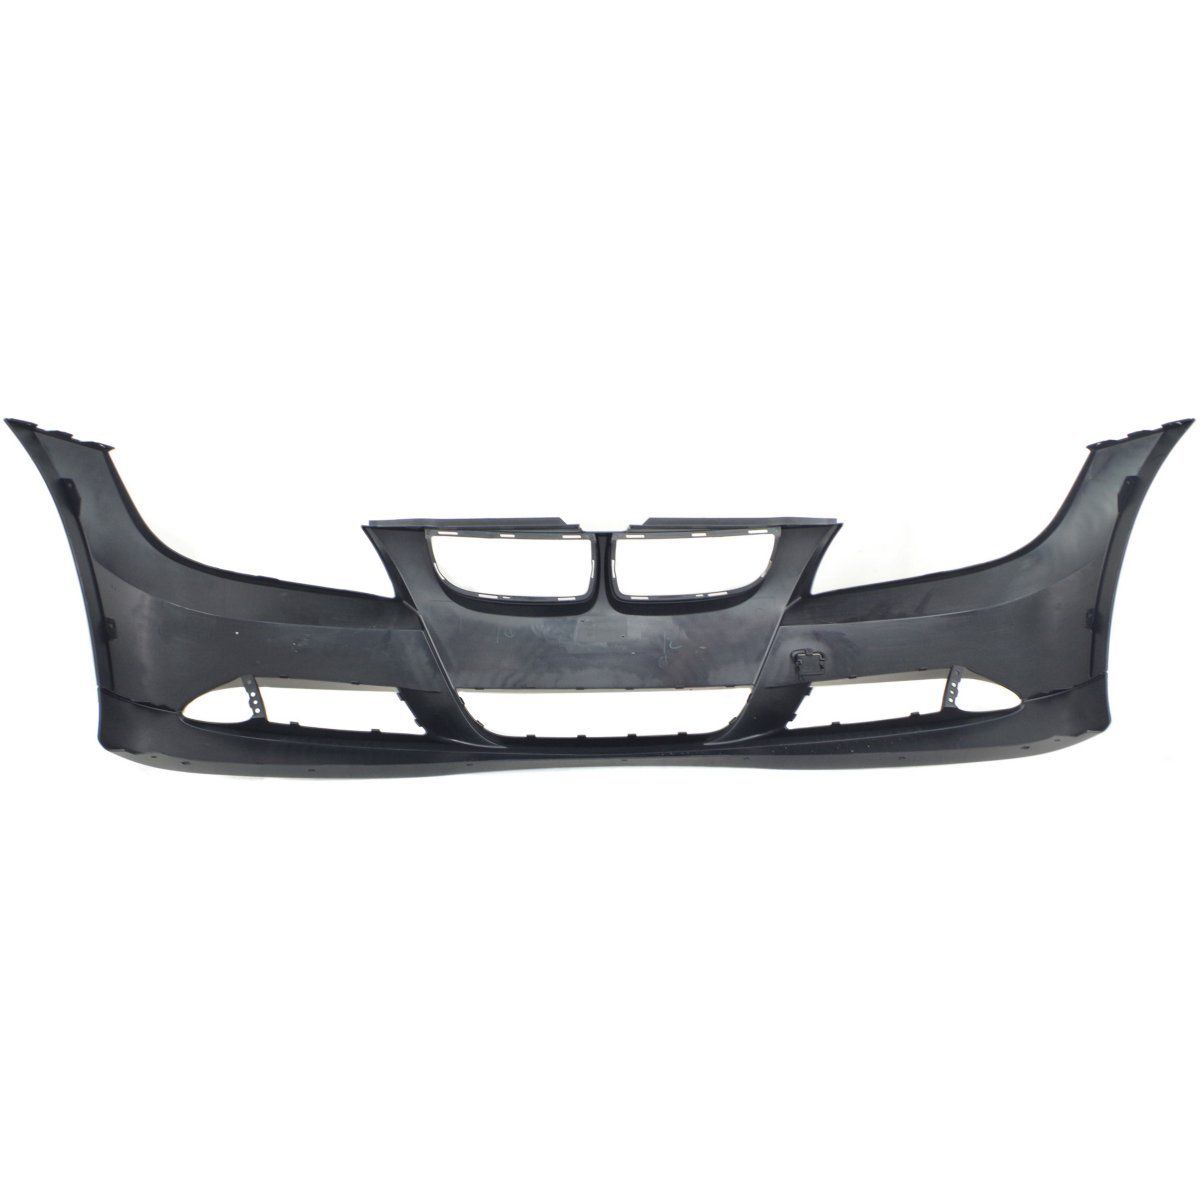 2006-2008 BMW 3-SERIES Front Bumper Cover 4dr sedan/wagon  w/o pk distance control  w/o headlamp washer Painted to Match